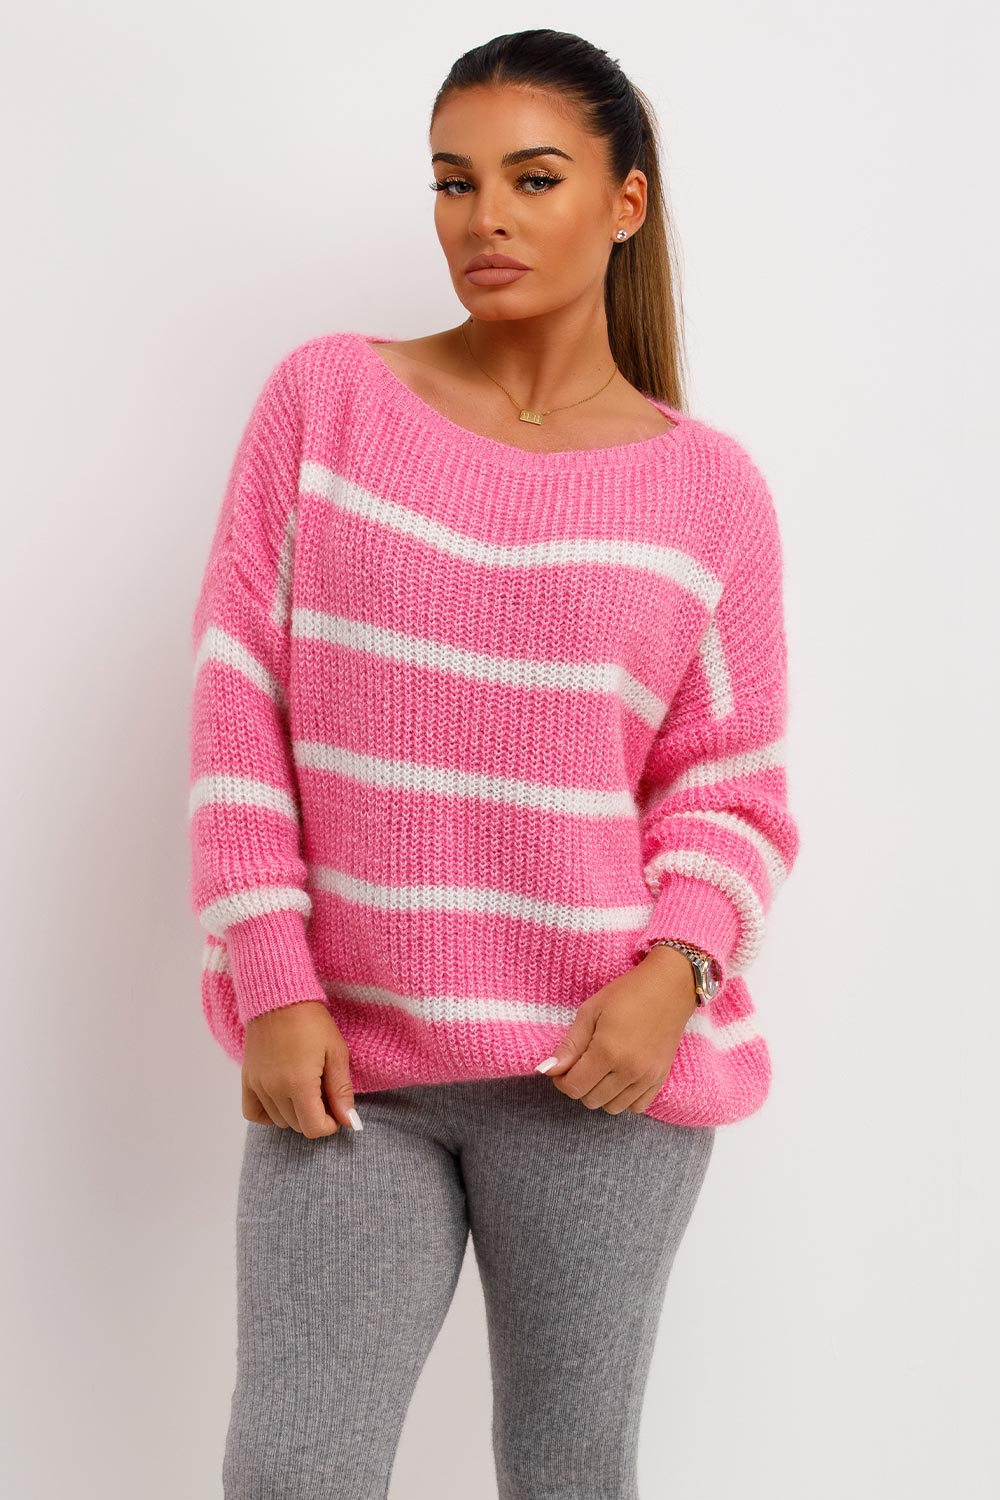 womens oversized knitted jumper with stripes